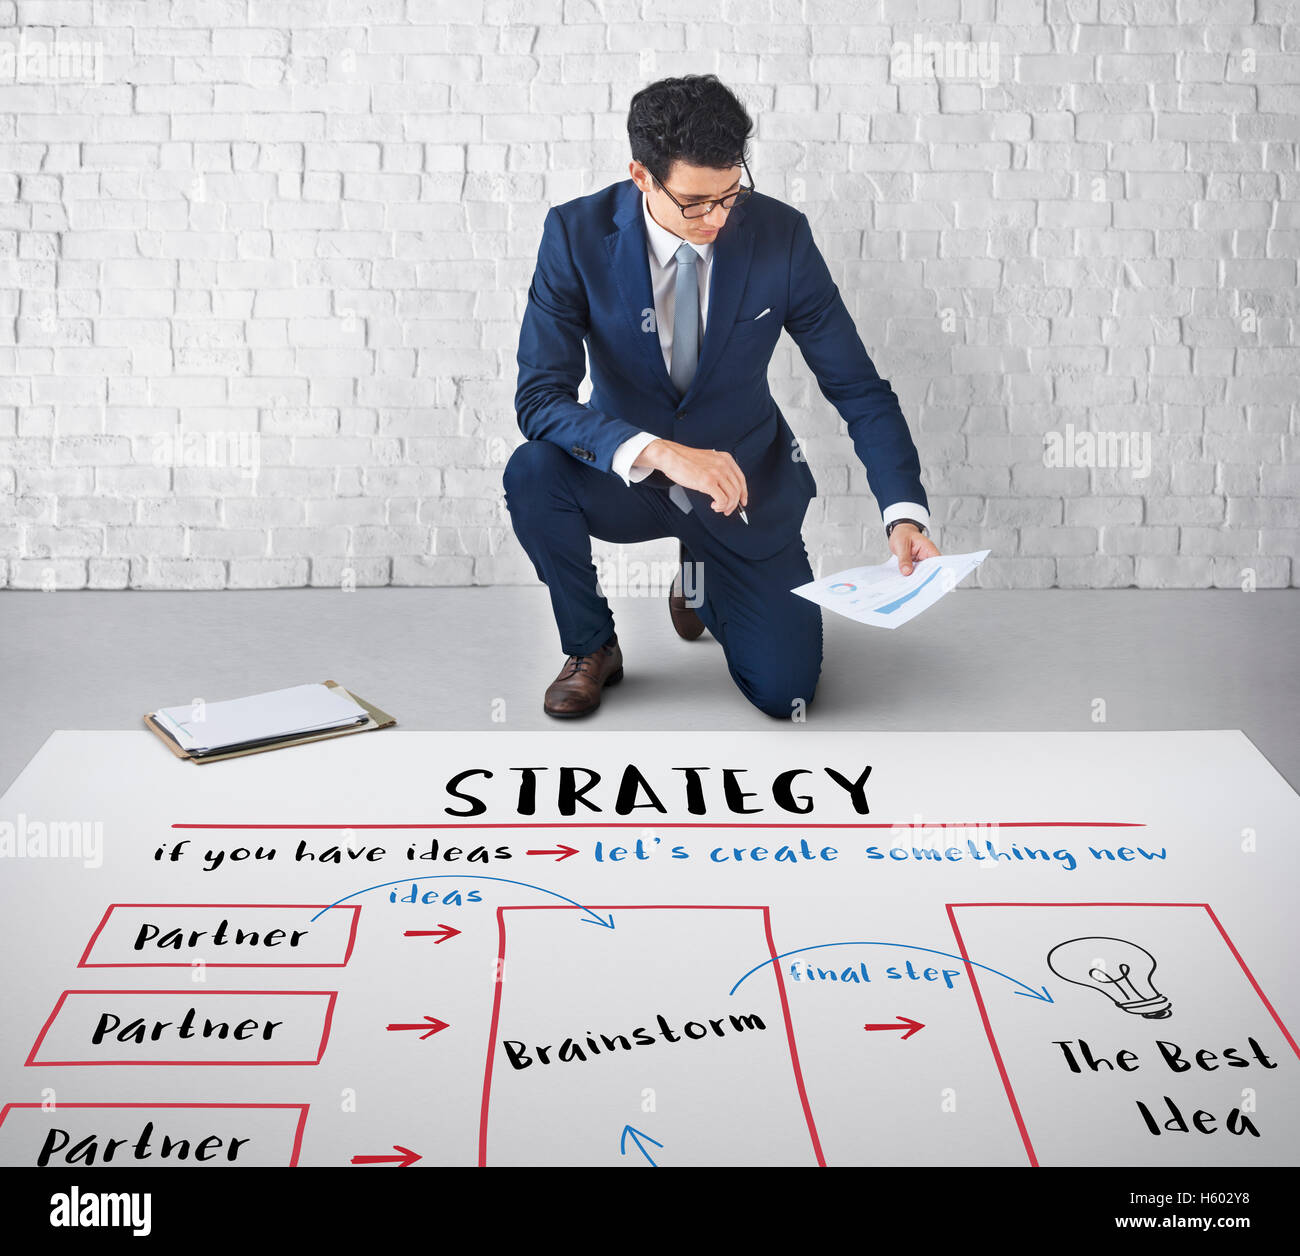 Strategy Business Plan Diagram Concept Stock Photo